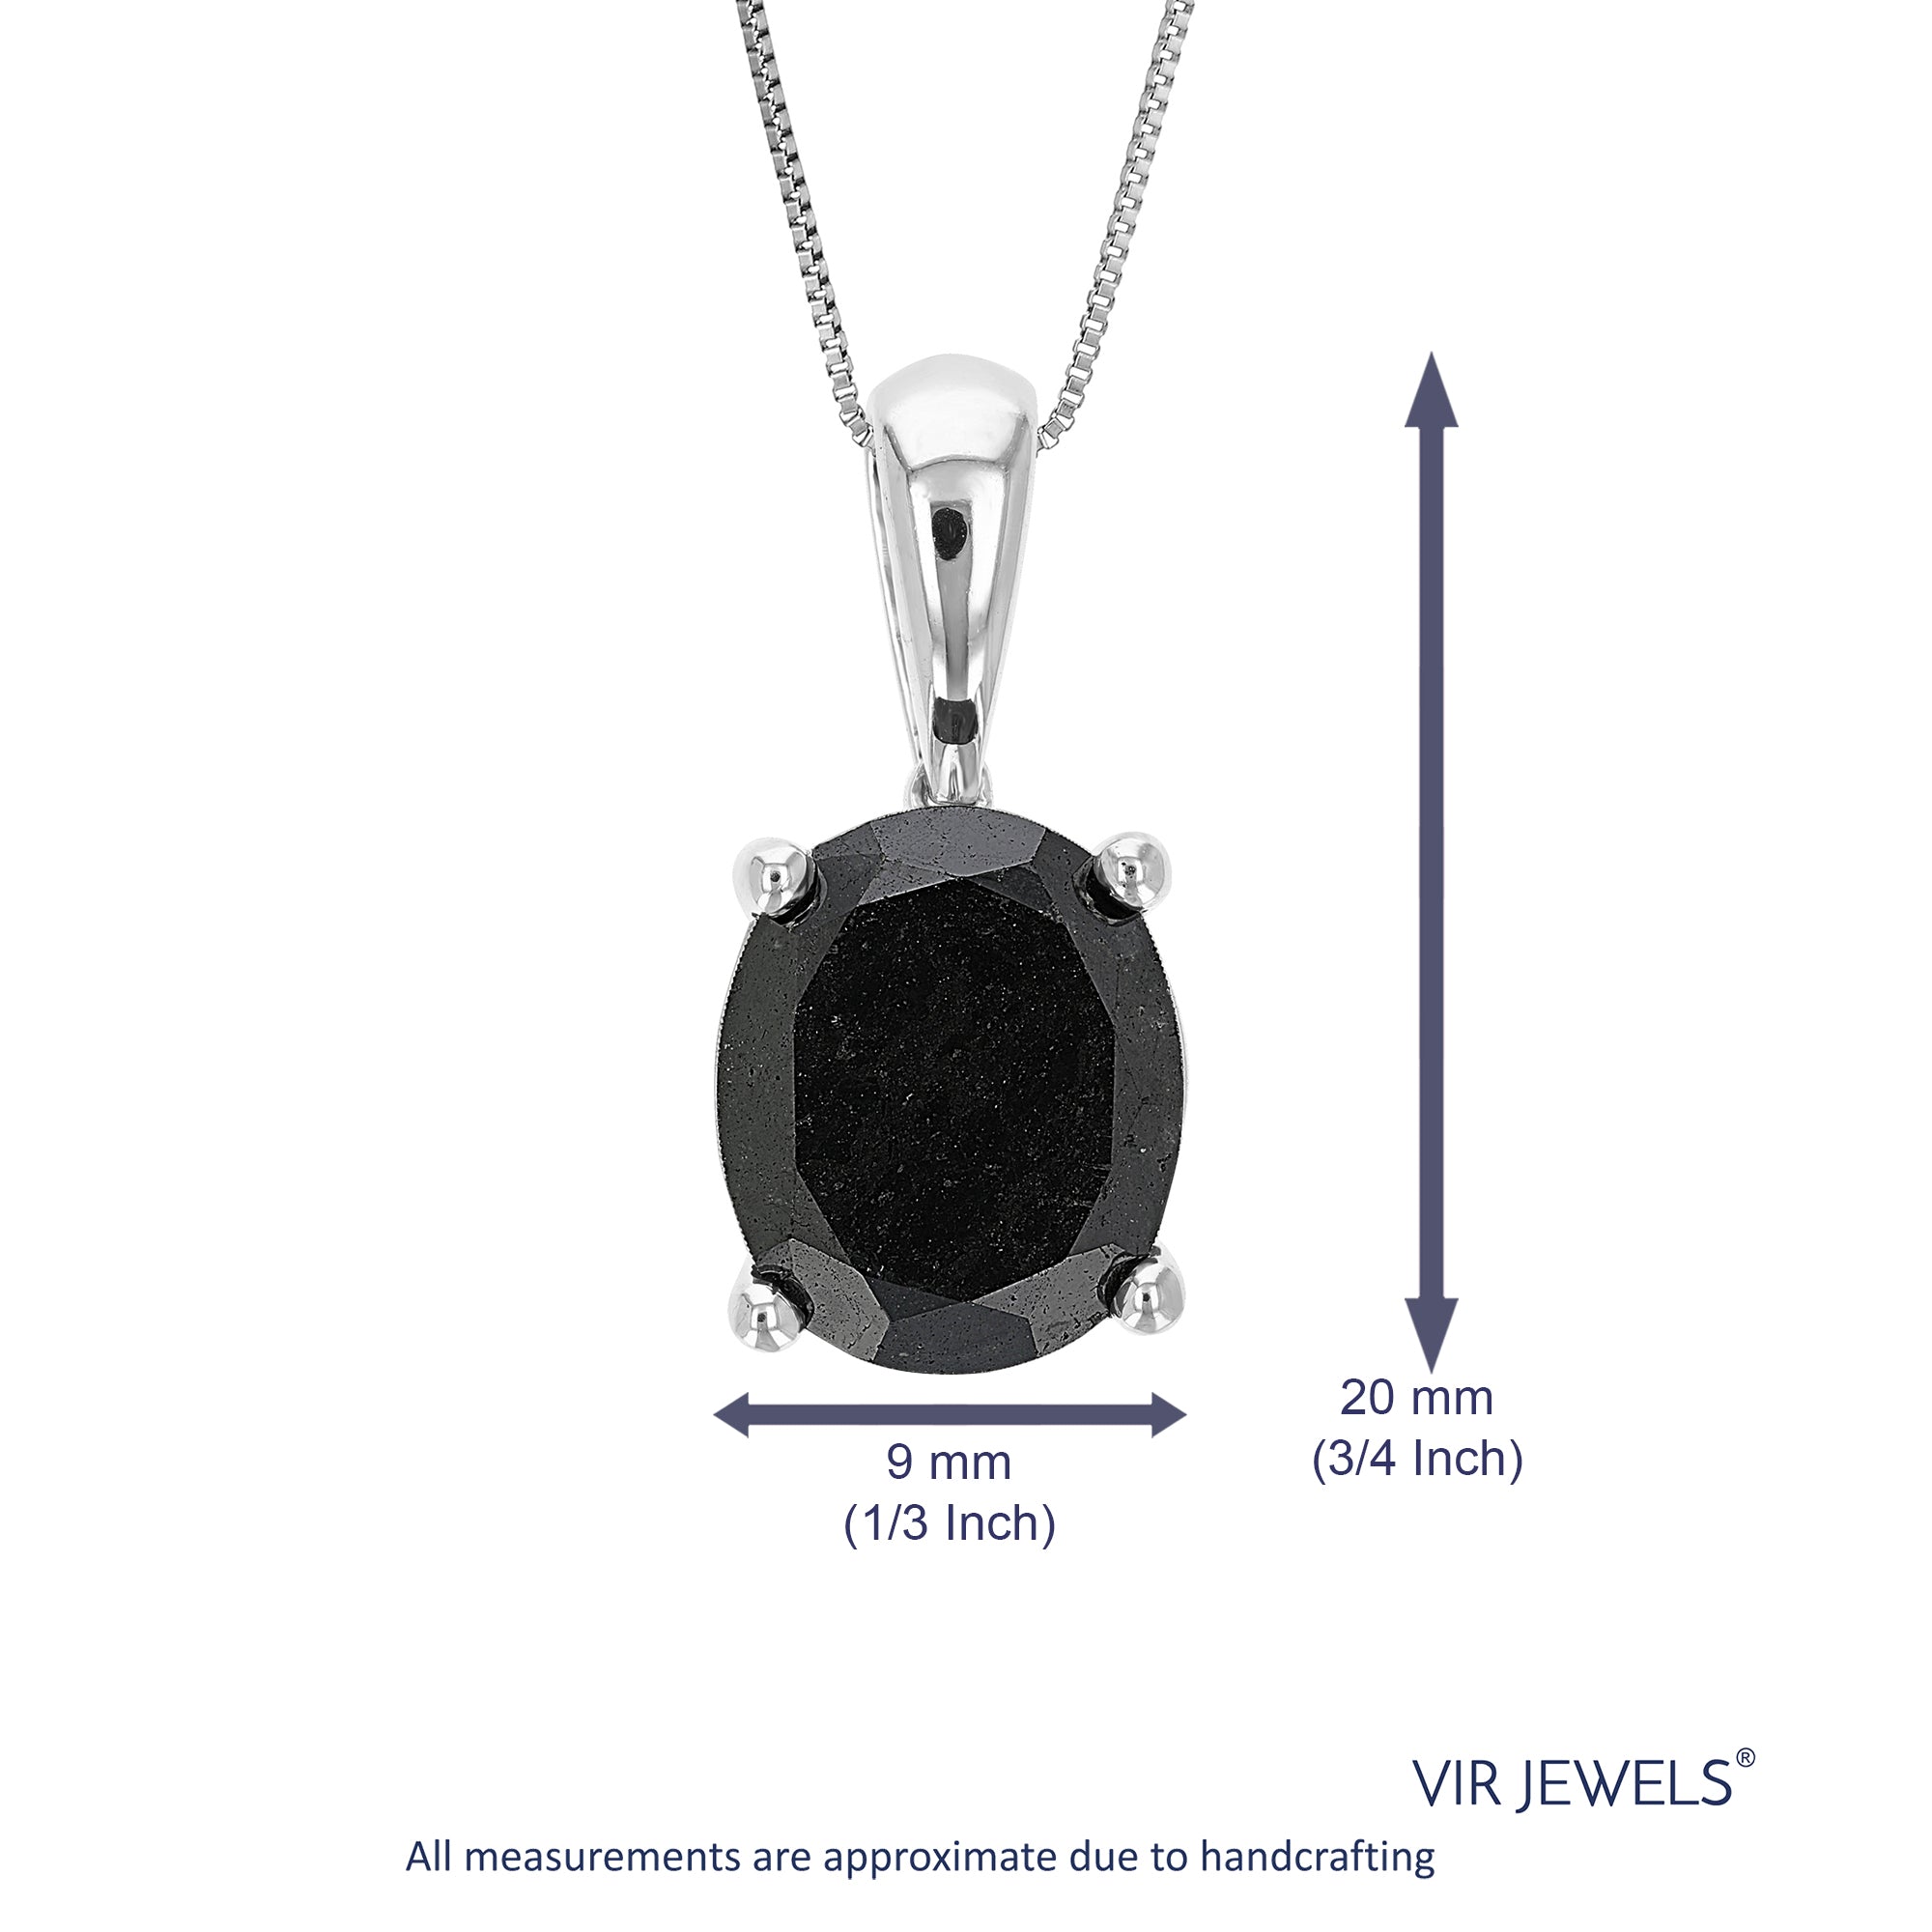 5 cttw Diamond Pendant, Black Diamond Oval Shape Pendant Necklace for Women in .925 Sterling Silver with 18 Inch Chain, Prong Setting